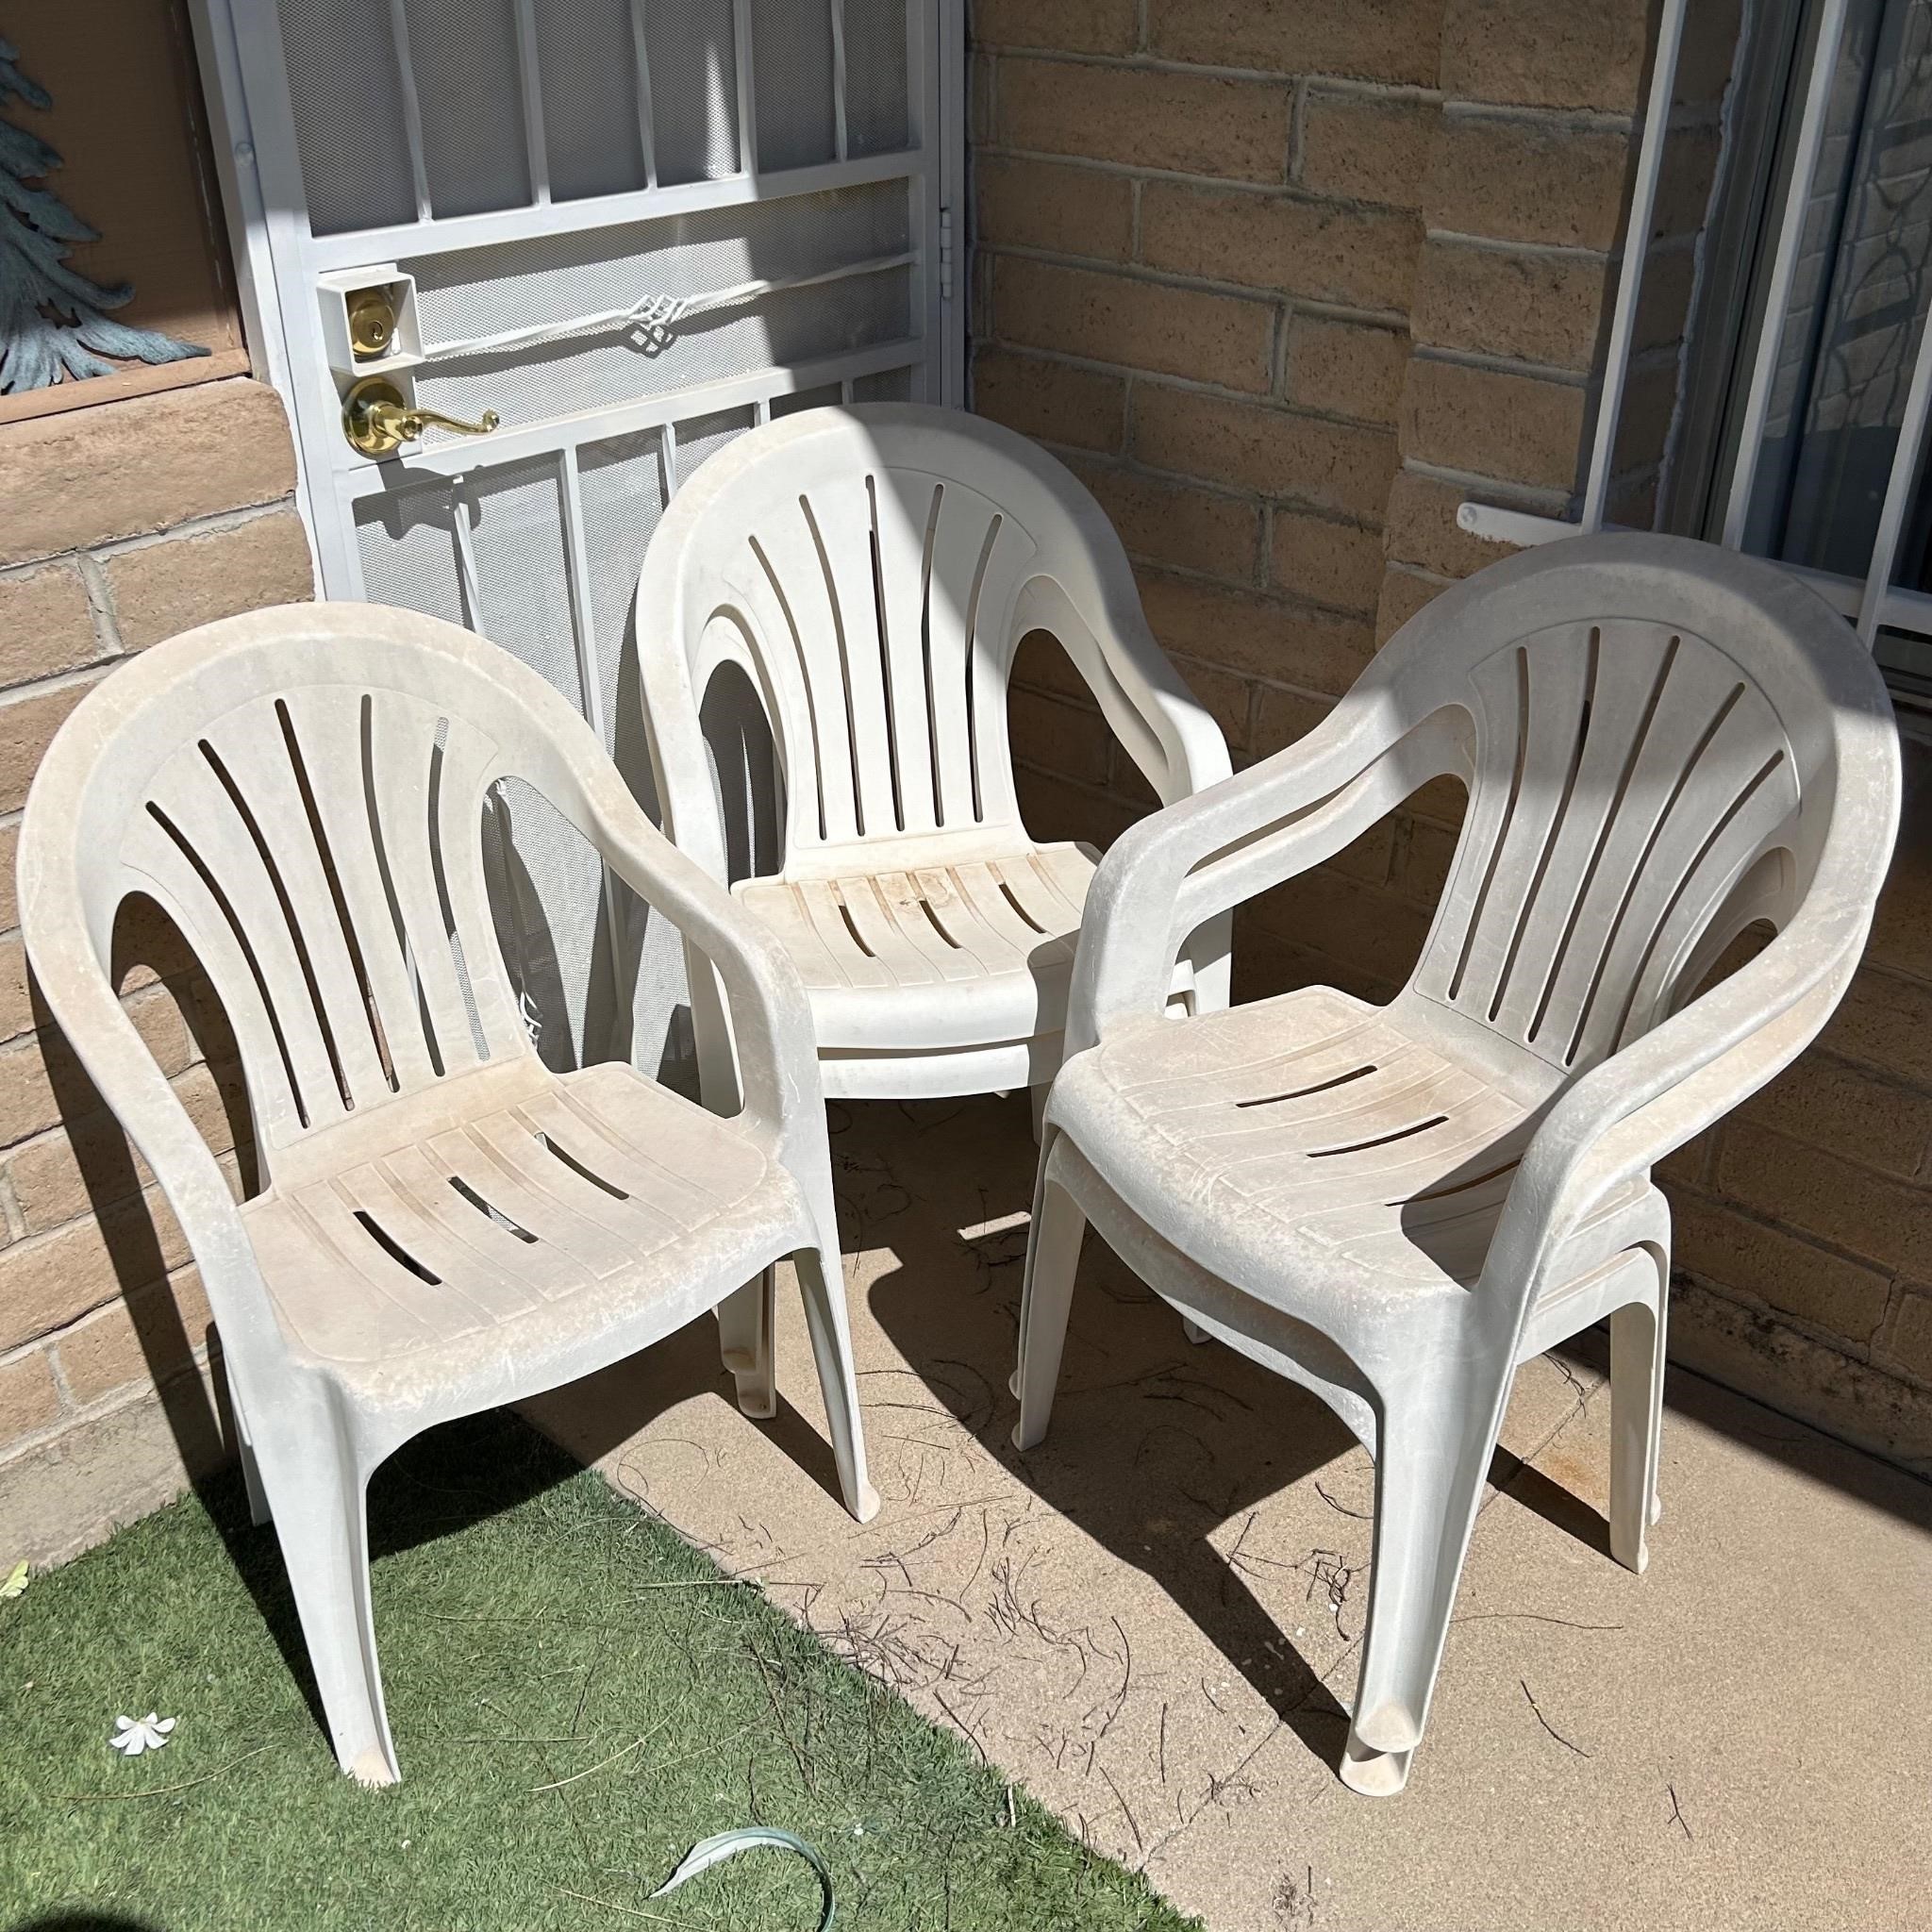 5 Plastic Lawn Chairs